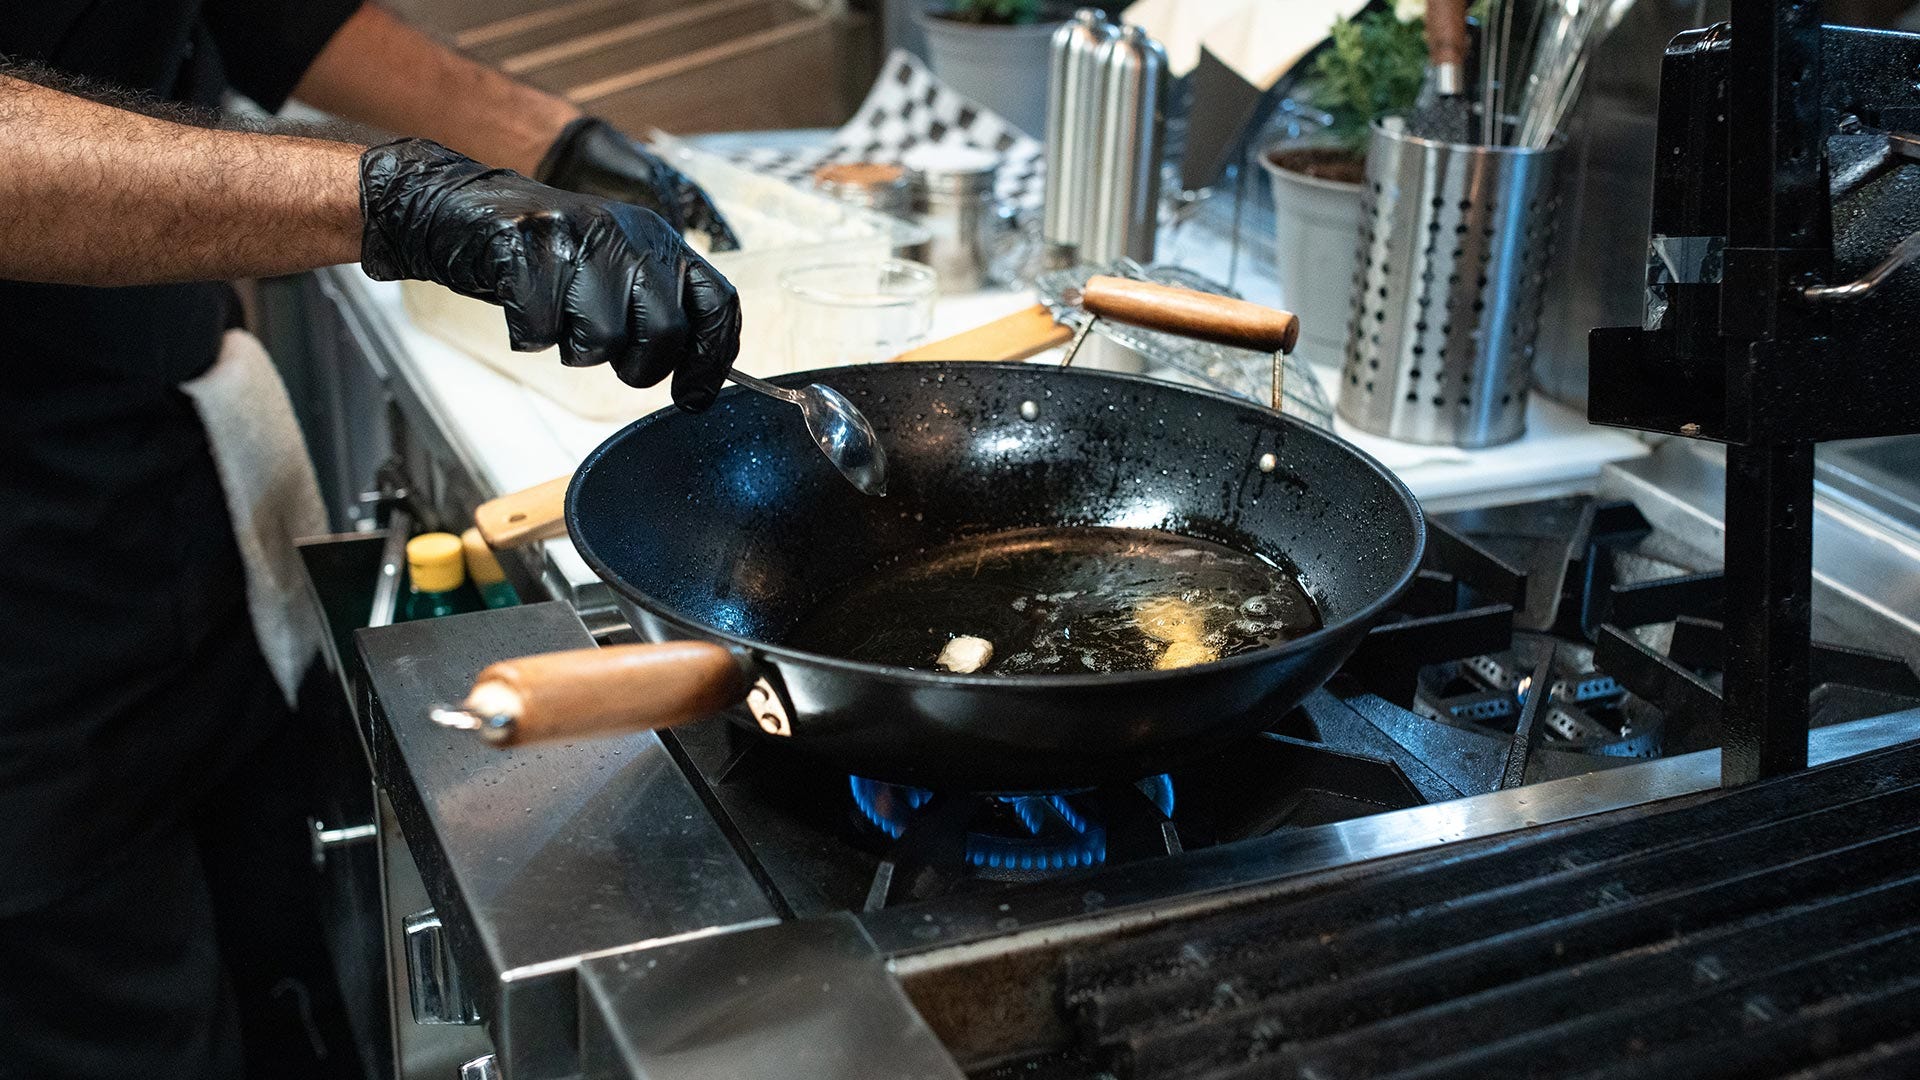 The Best Frying Pan for You and Your Cooking Style